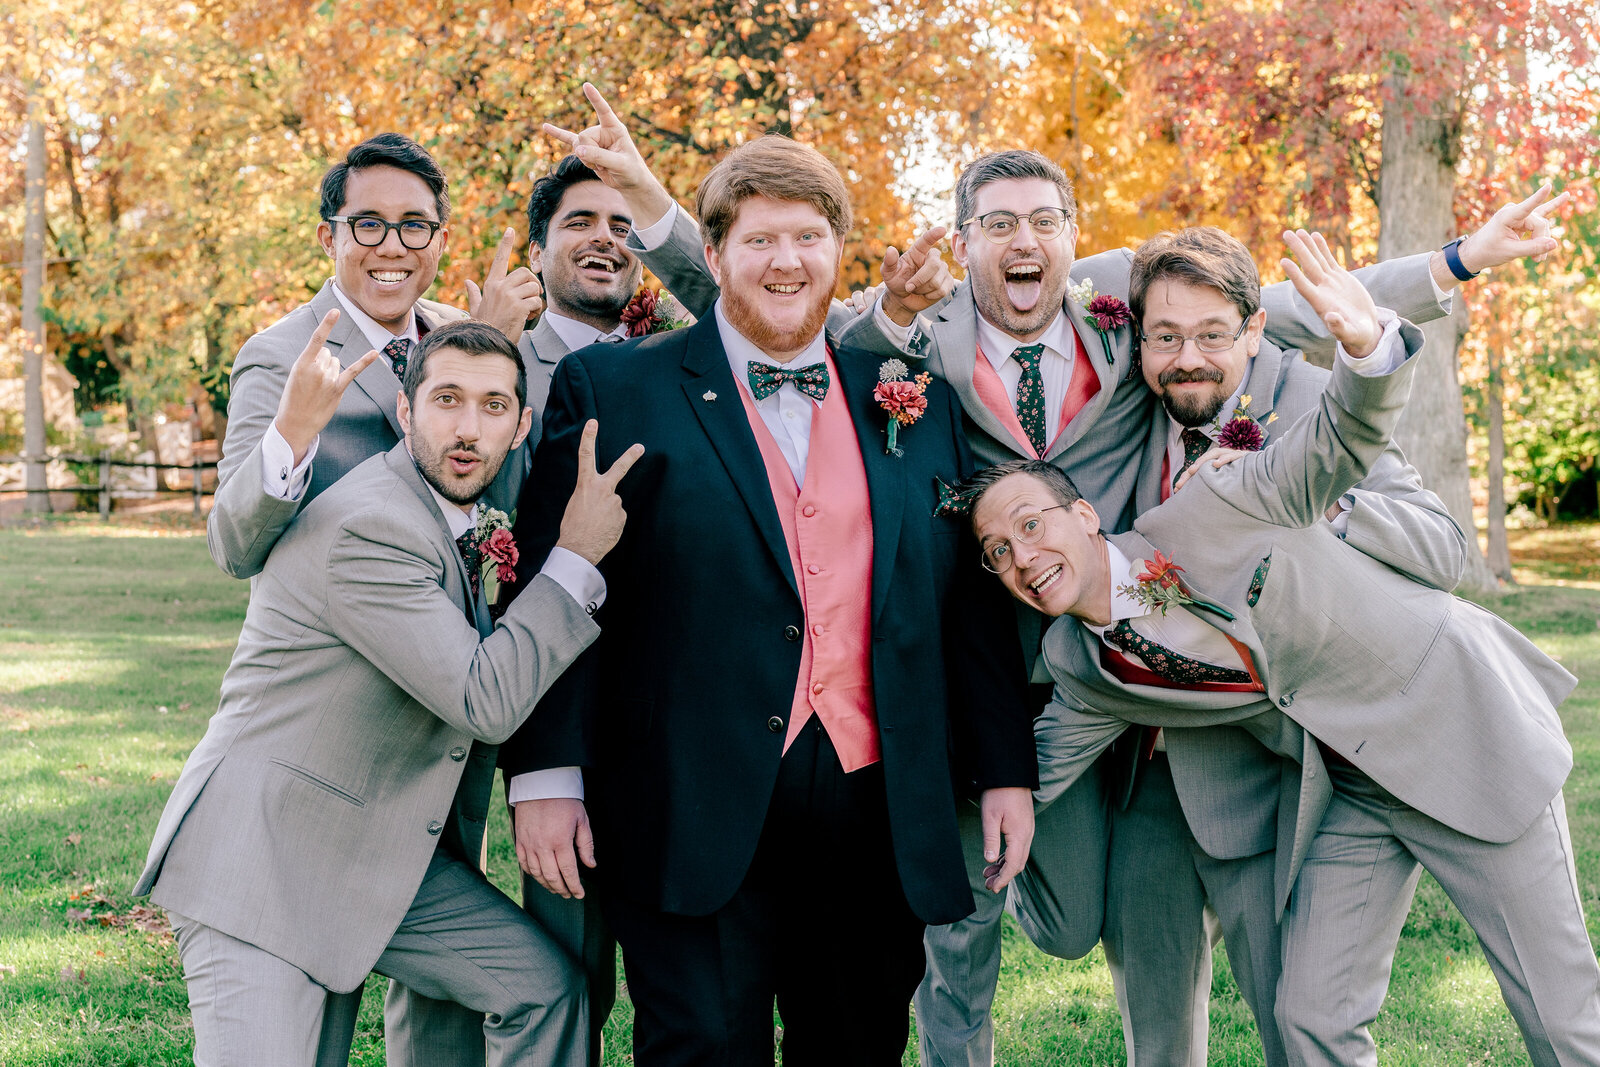 A groom and his groomsmen posing for a funny group picture before his wedding in Northern Virginia